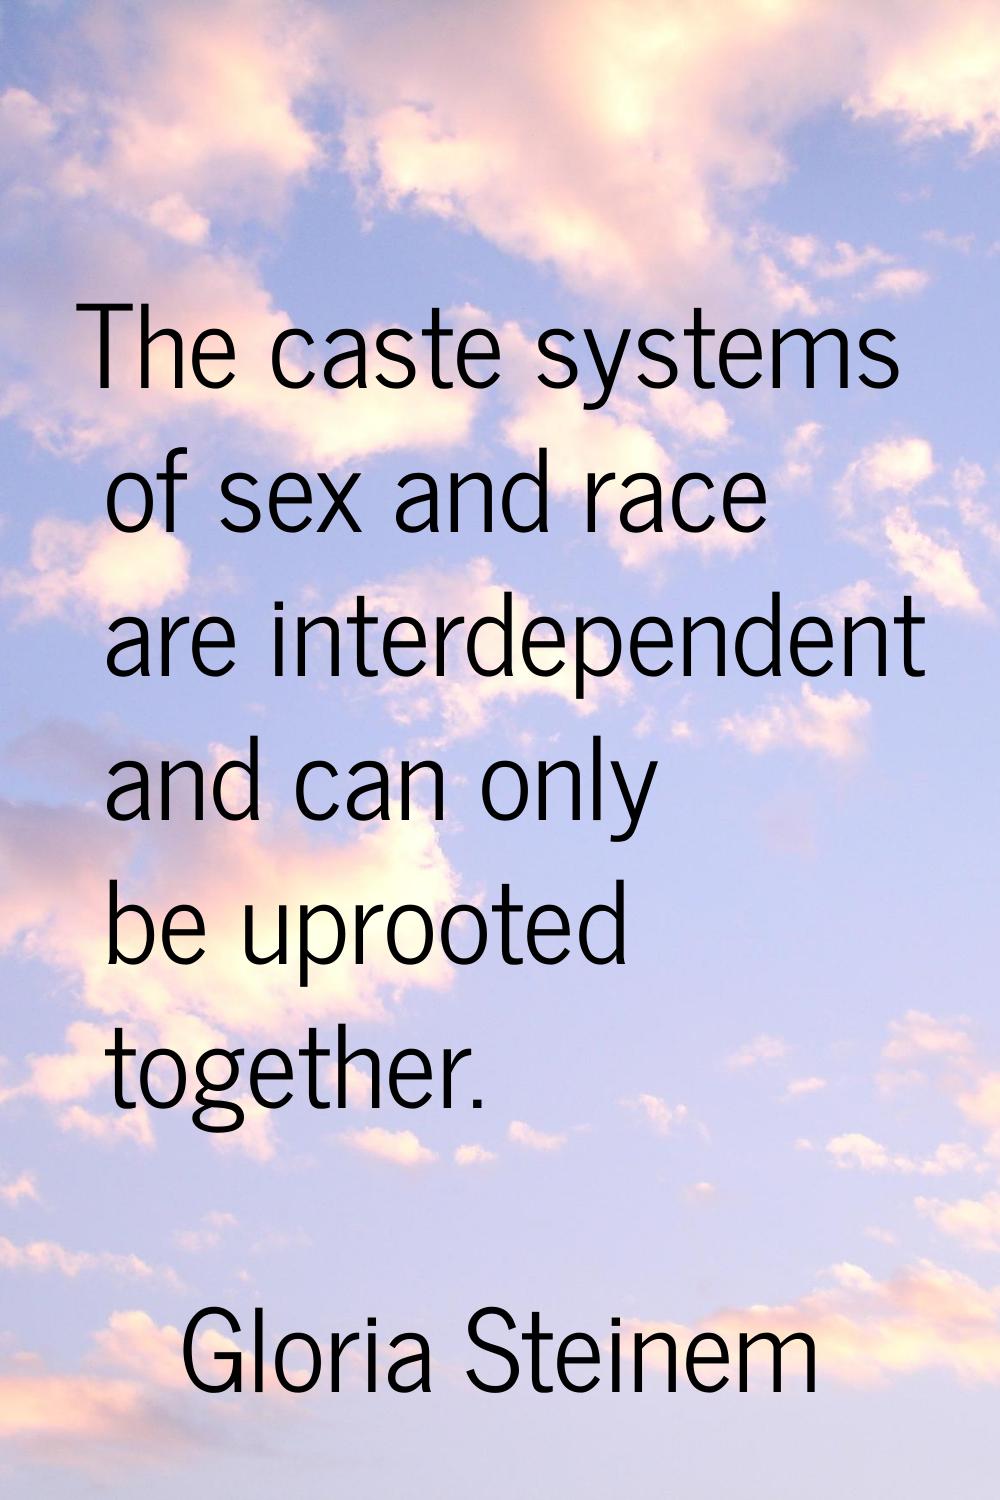 The caste systems of sex and race are interdependent and can only be uprooted together.